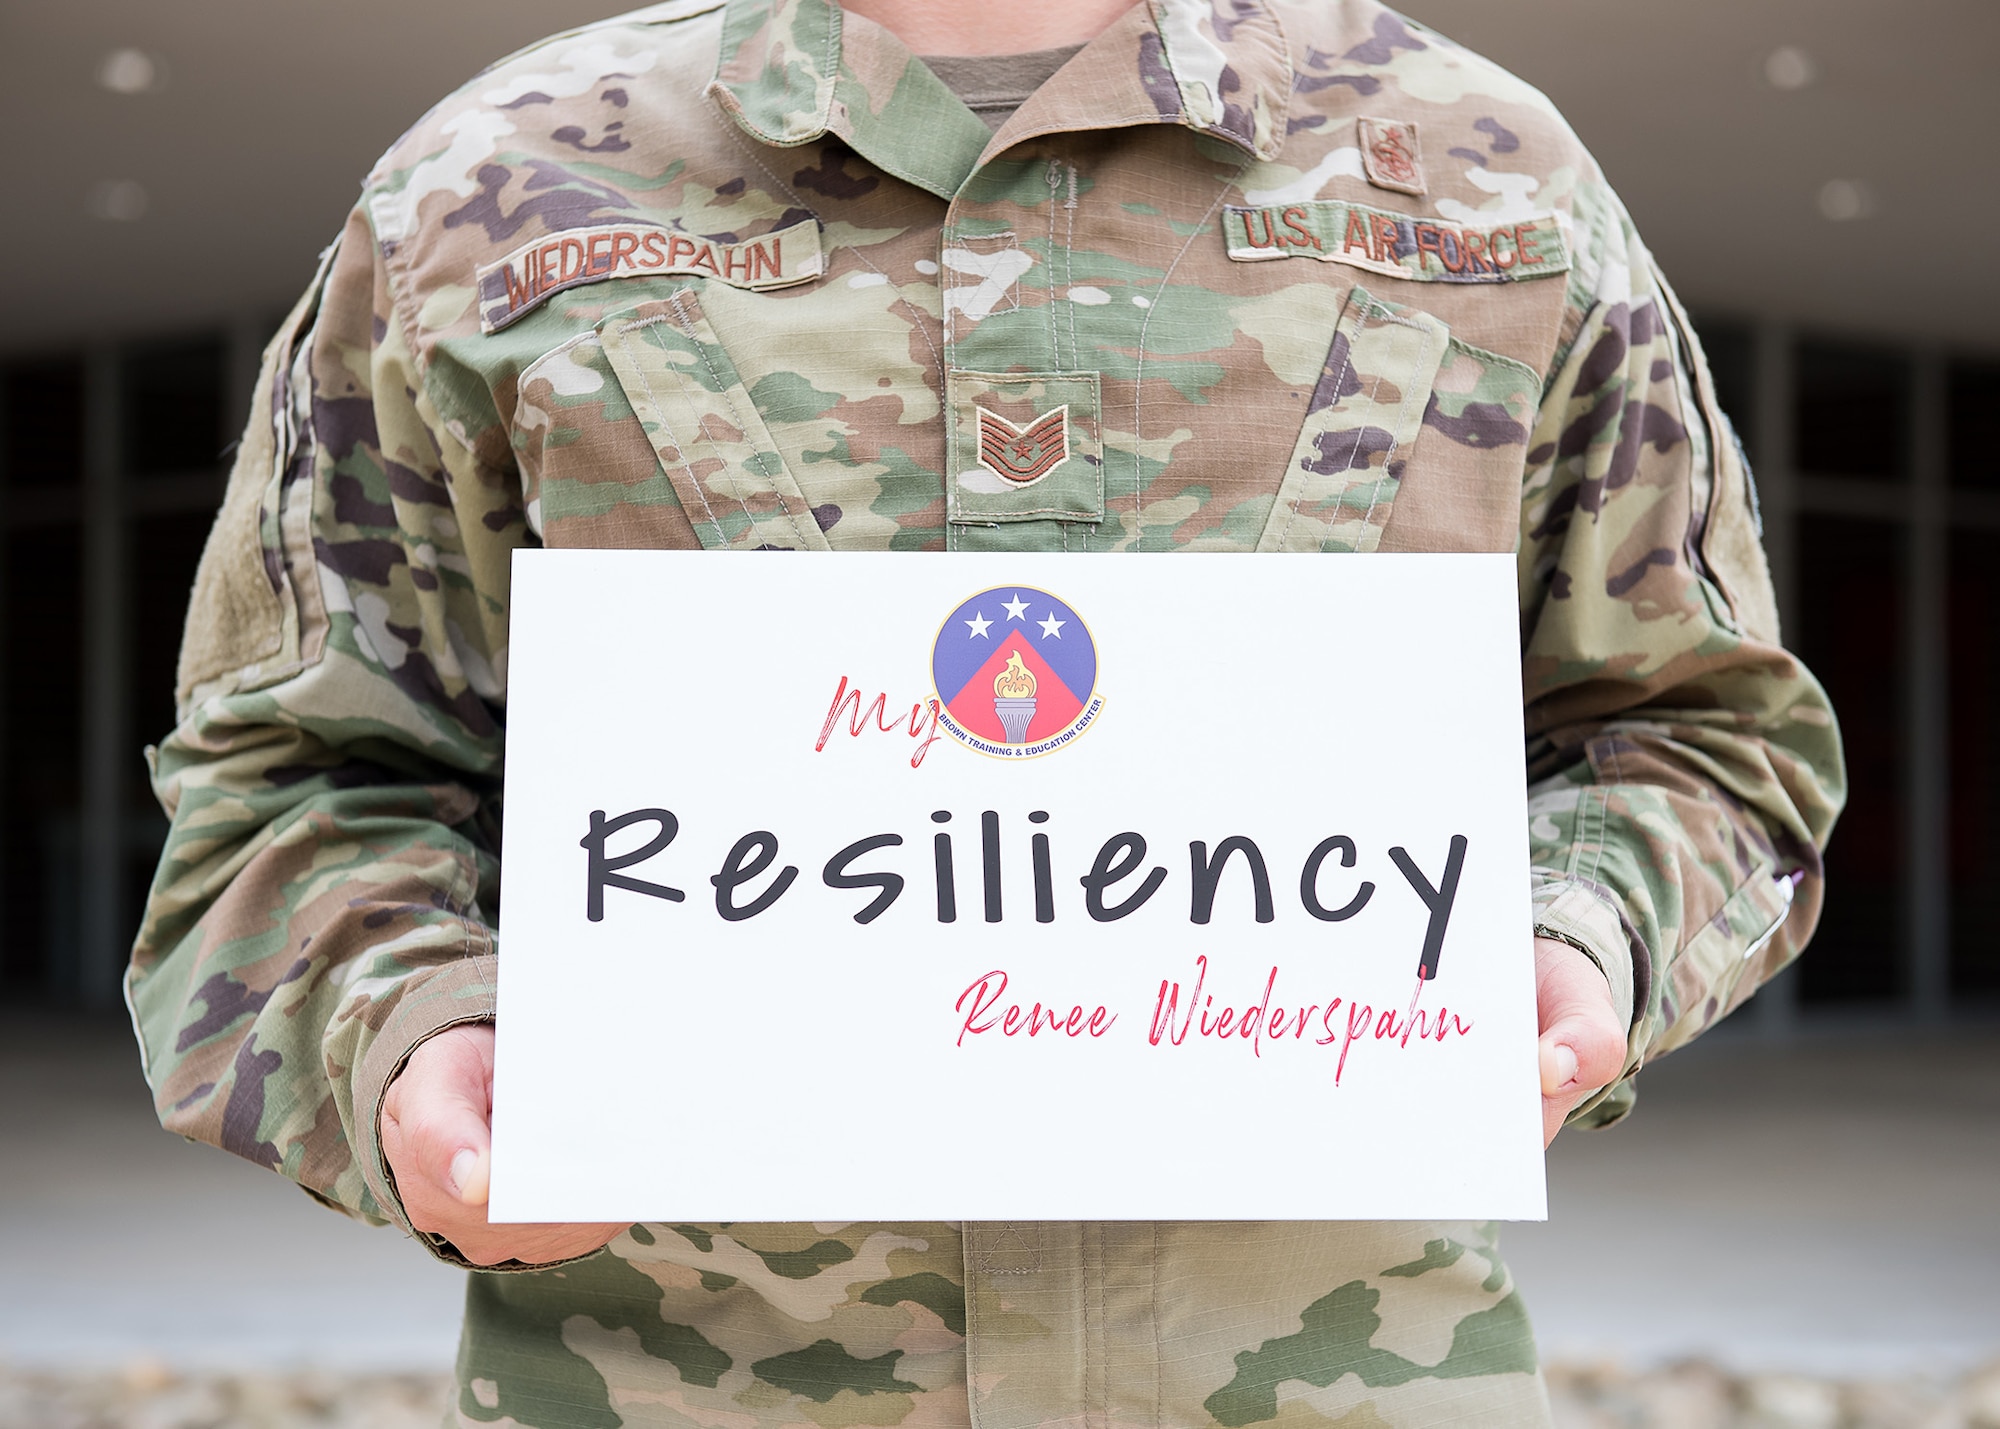 Holding a resiliency sign.